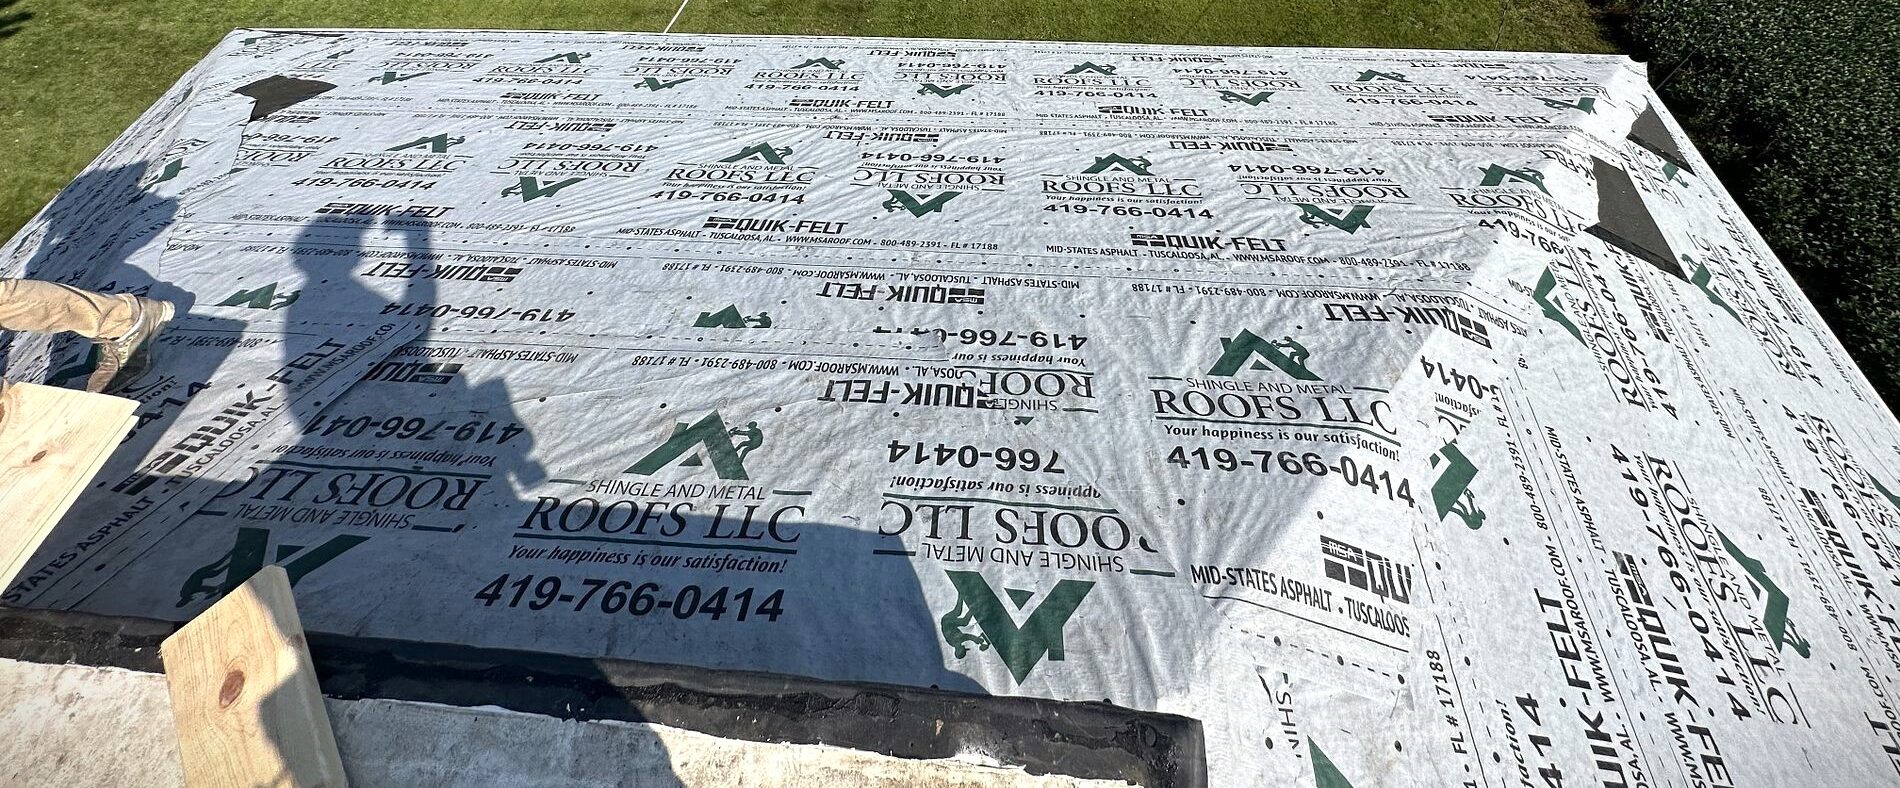 Shingle and Metal Roofs branded underlayment for metal roofing